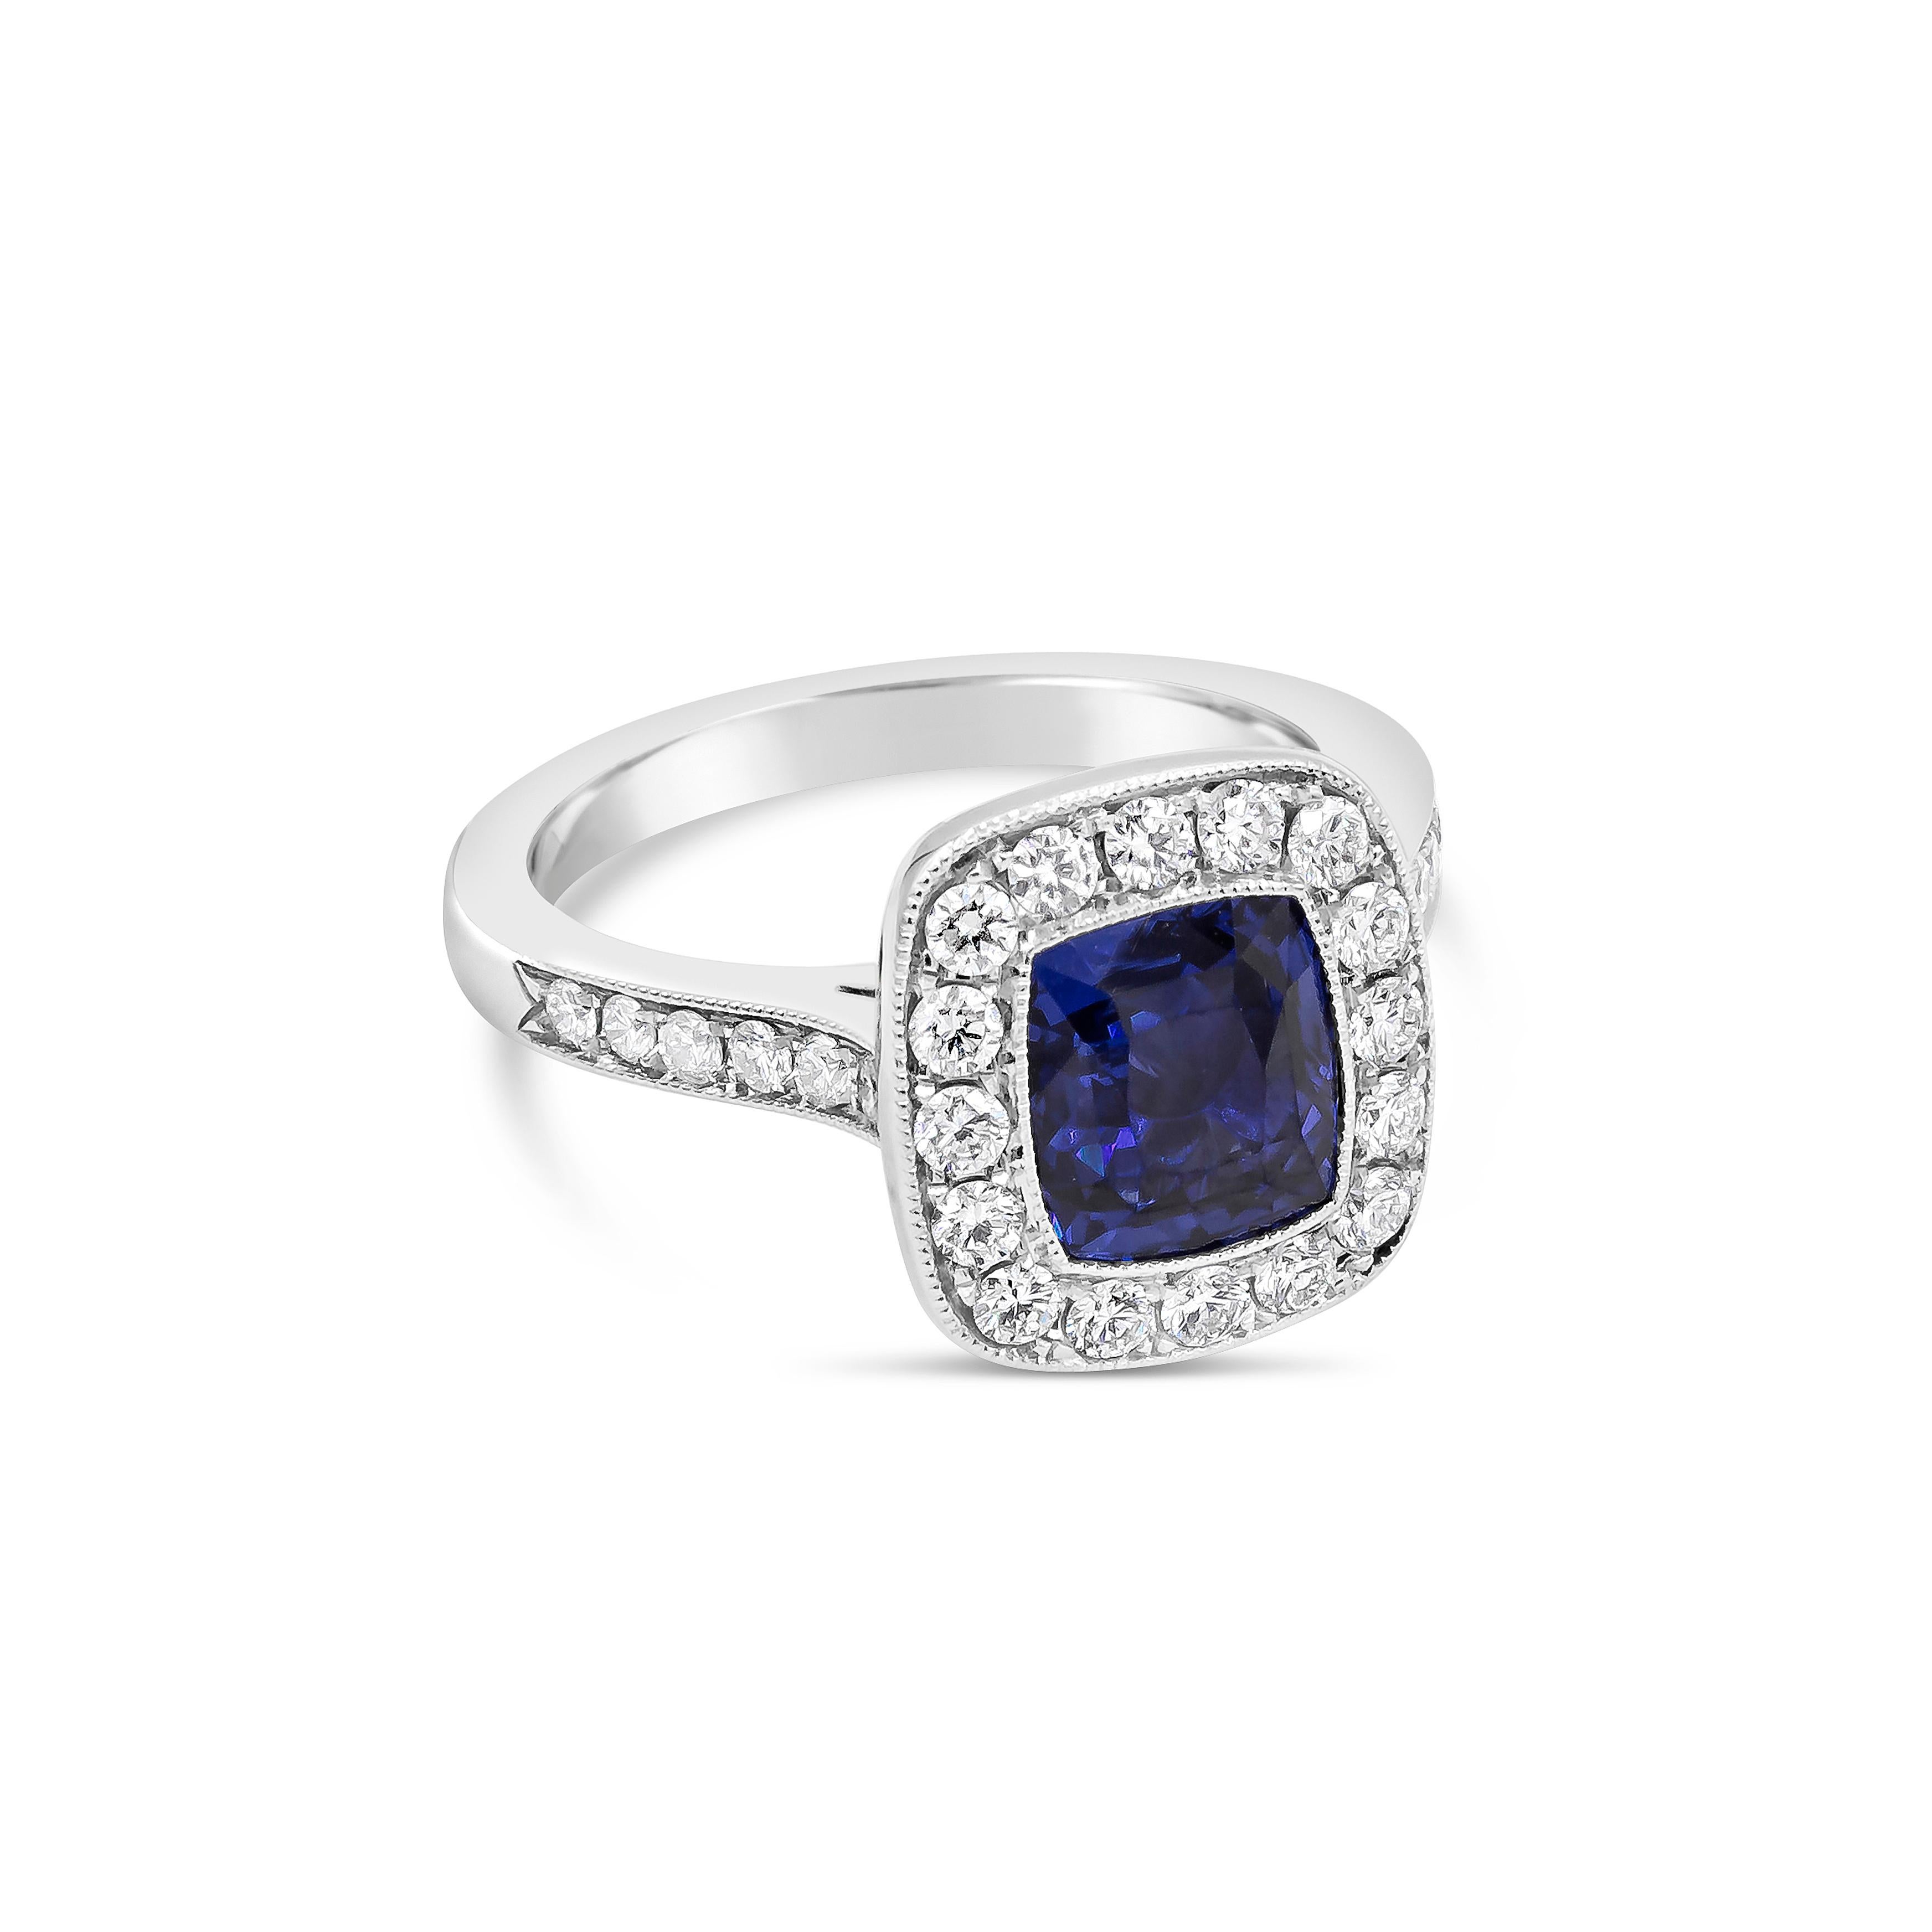 Showcasing a 2.11 carat cushion cut blue sapphire that GIA certified as BLUE color with no indications of heat treatment. Surrounding the sapphire is a row of round brilliant diamonds, in a diamond encrusted mounting made in platinum. Accent